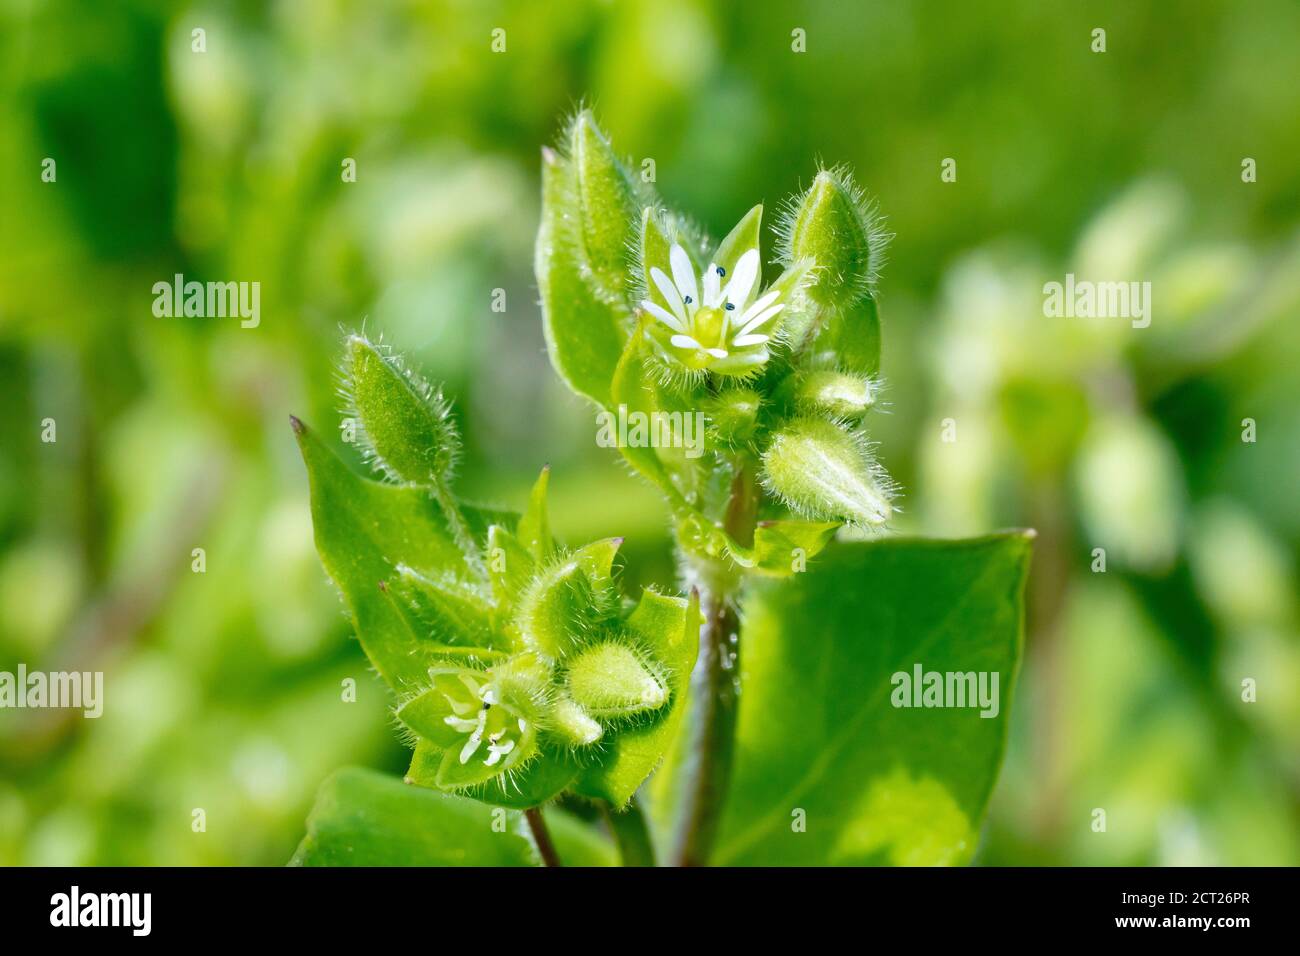 Common Chickweed (stellaria media), close up of a single open flower with buds and leaves. Stock Photo